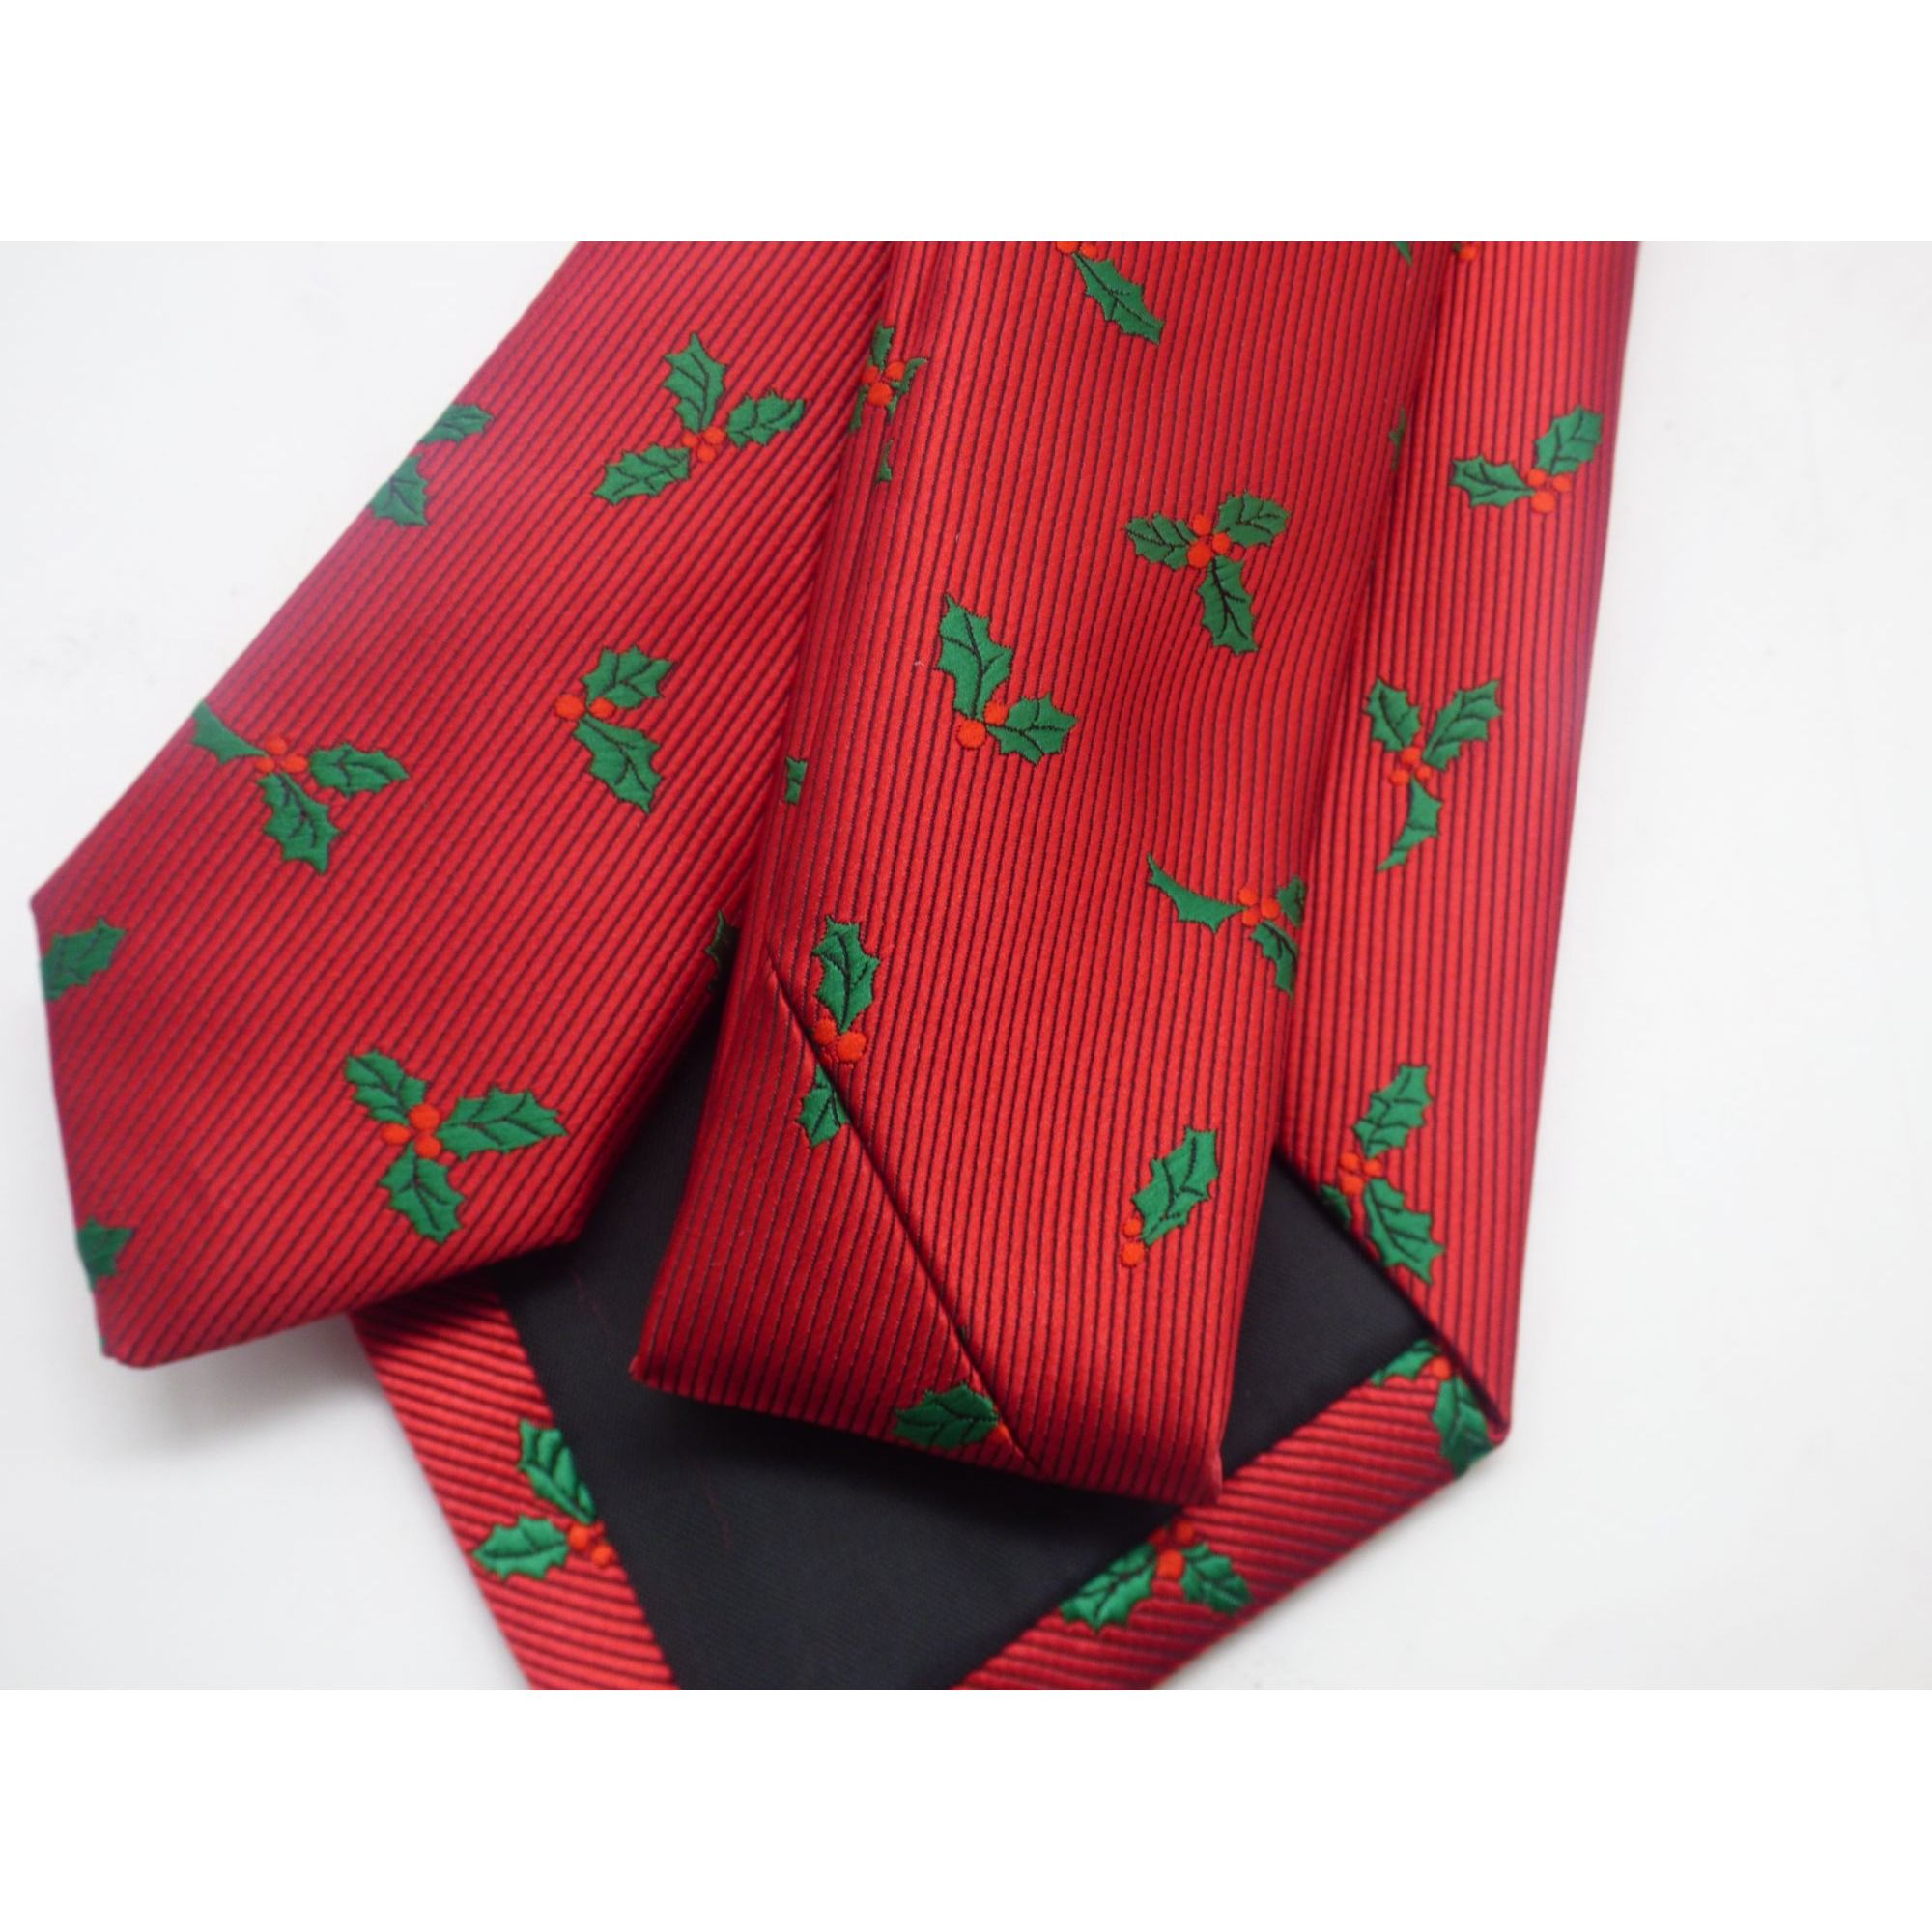 John Ashford JOHN ASHFORD Woven Holly Men's Holiday Tie, Red Size ONE SIZE - 7 Preview